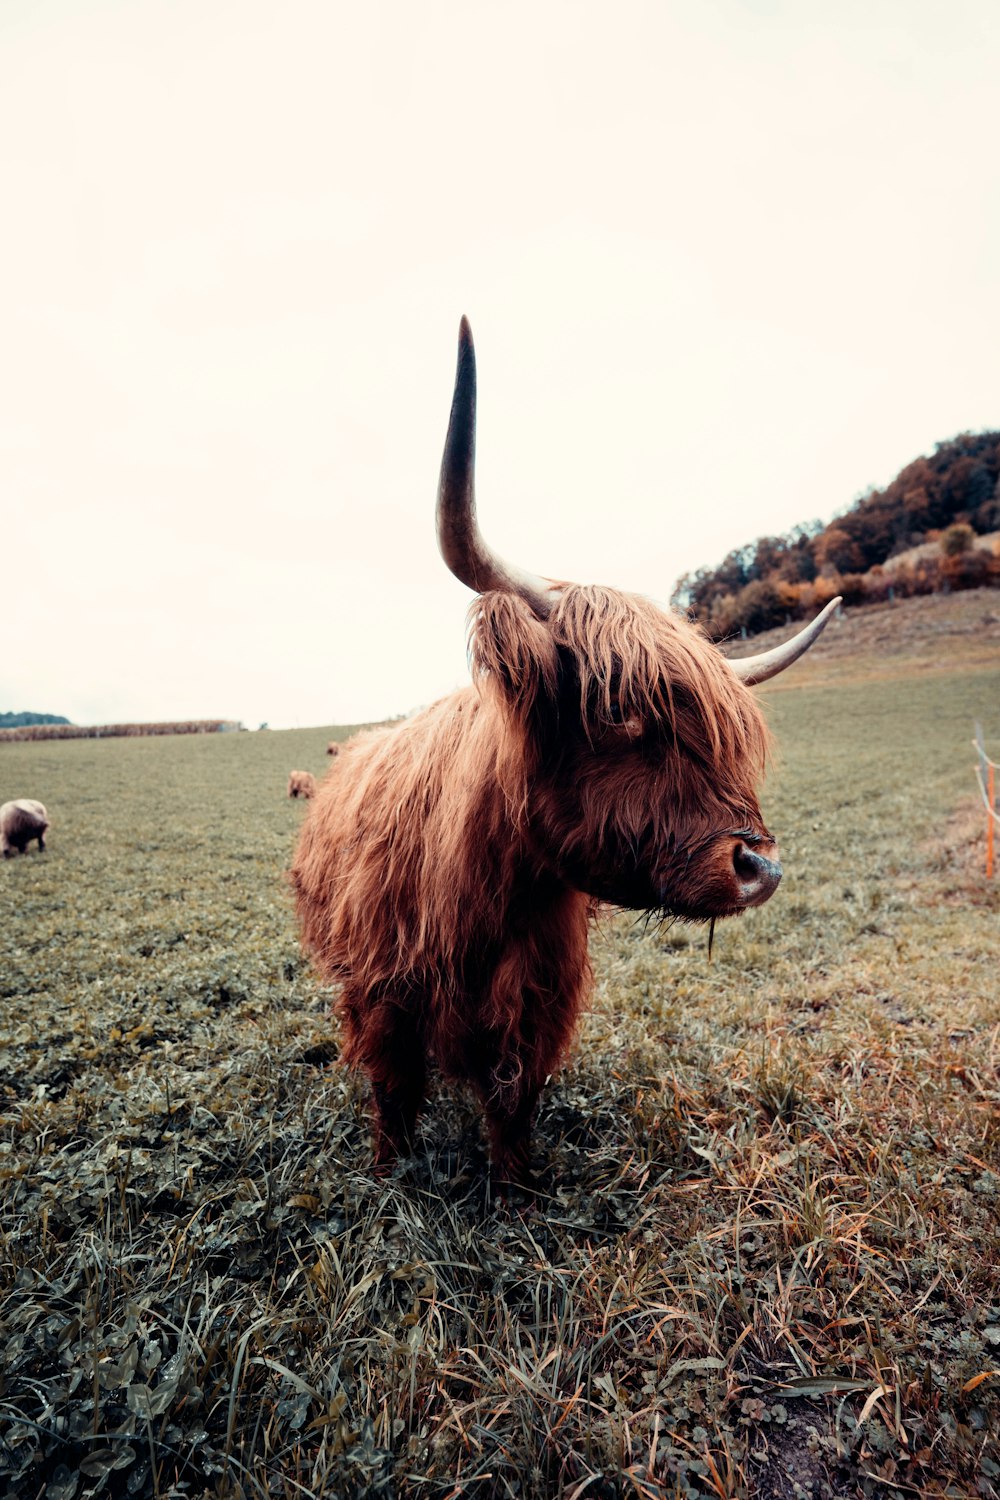 brown yak on green grass field under white cloudy sky during daytime